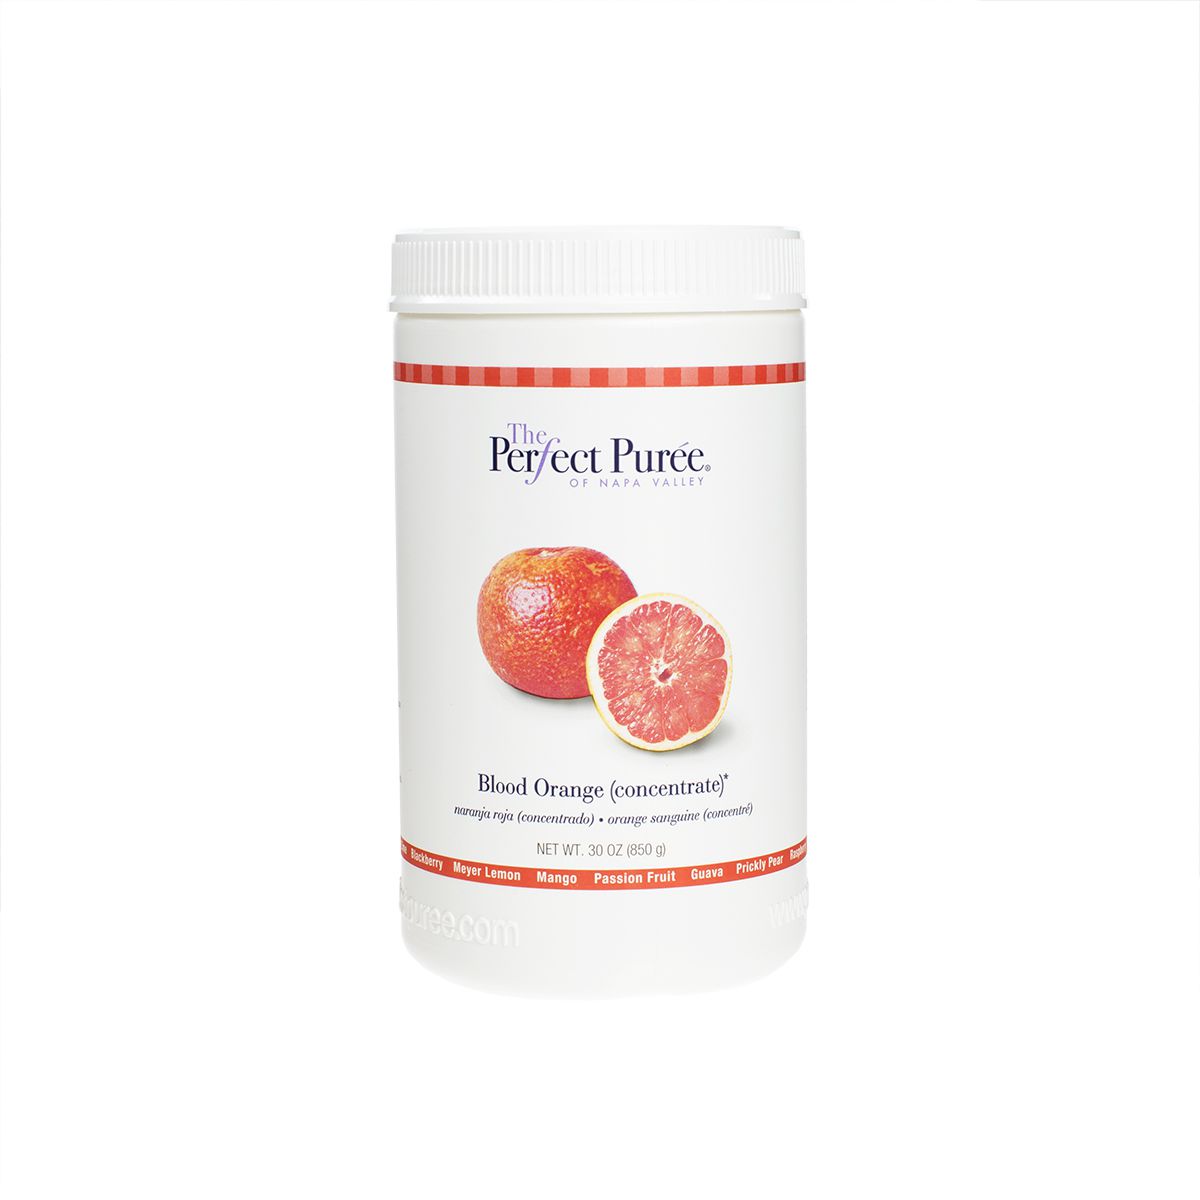 The Perfect Puree Blood Orange Concentrate